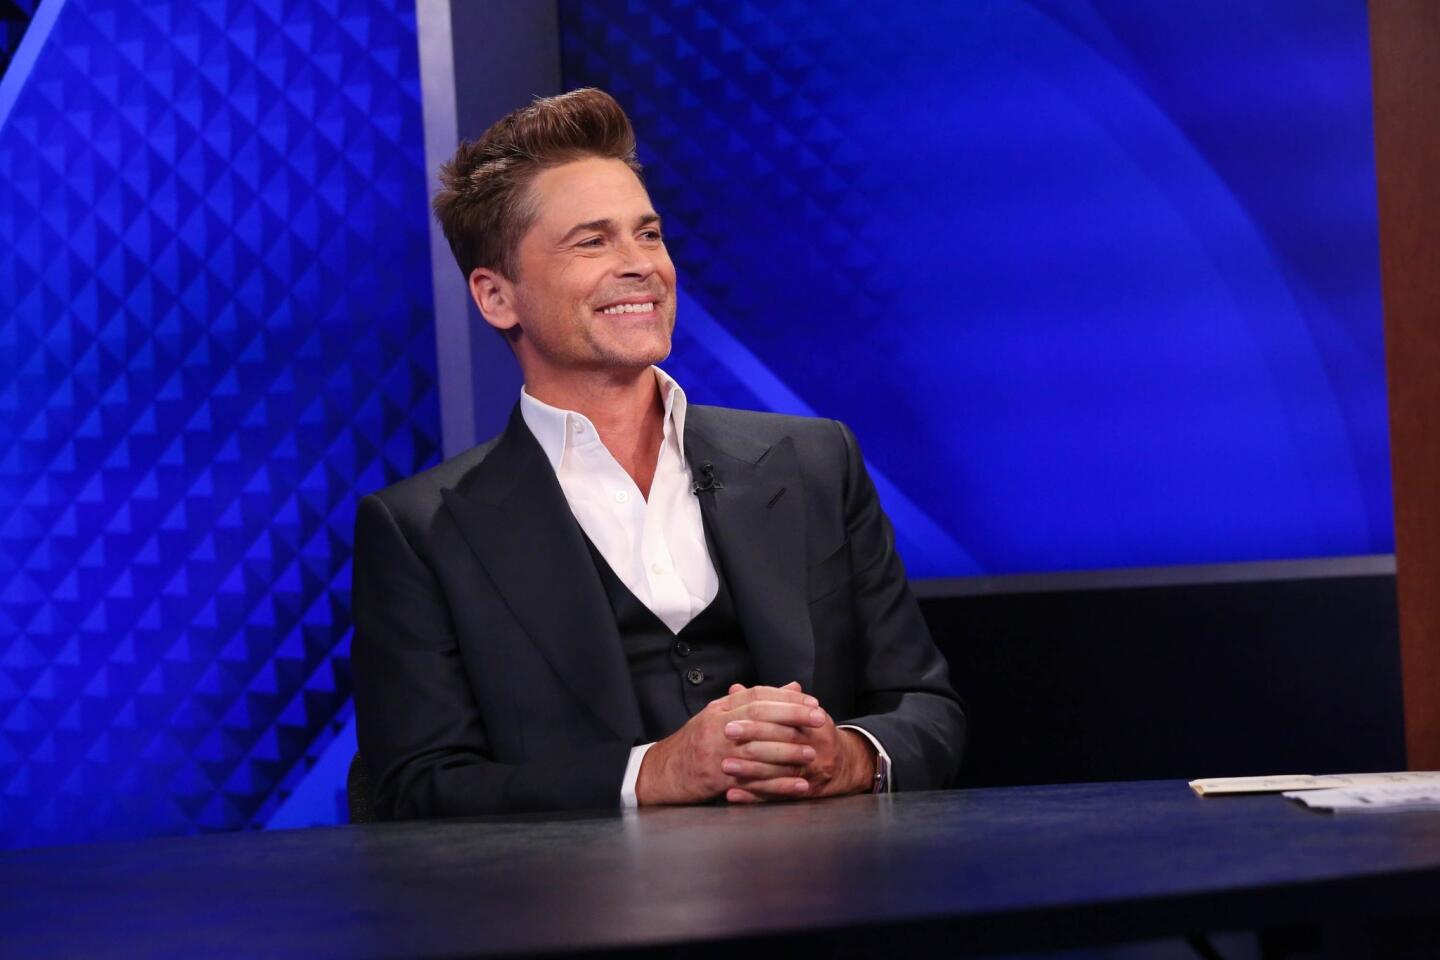 Rob Lowe: Move and commute